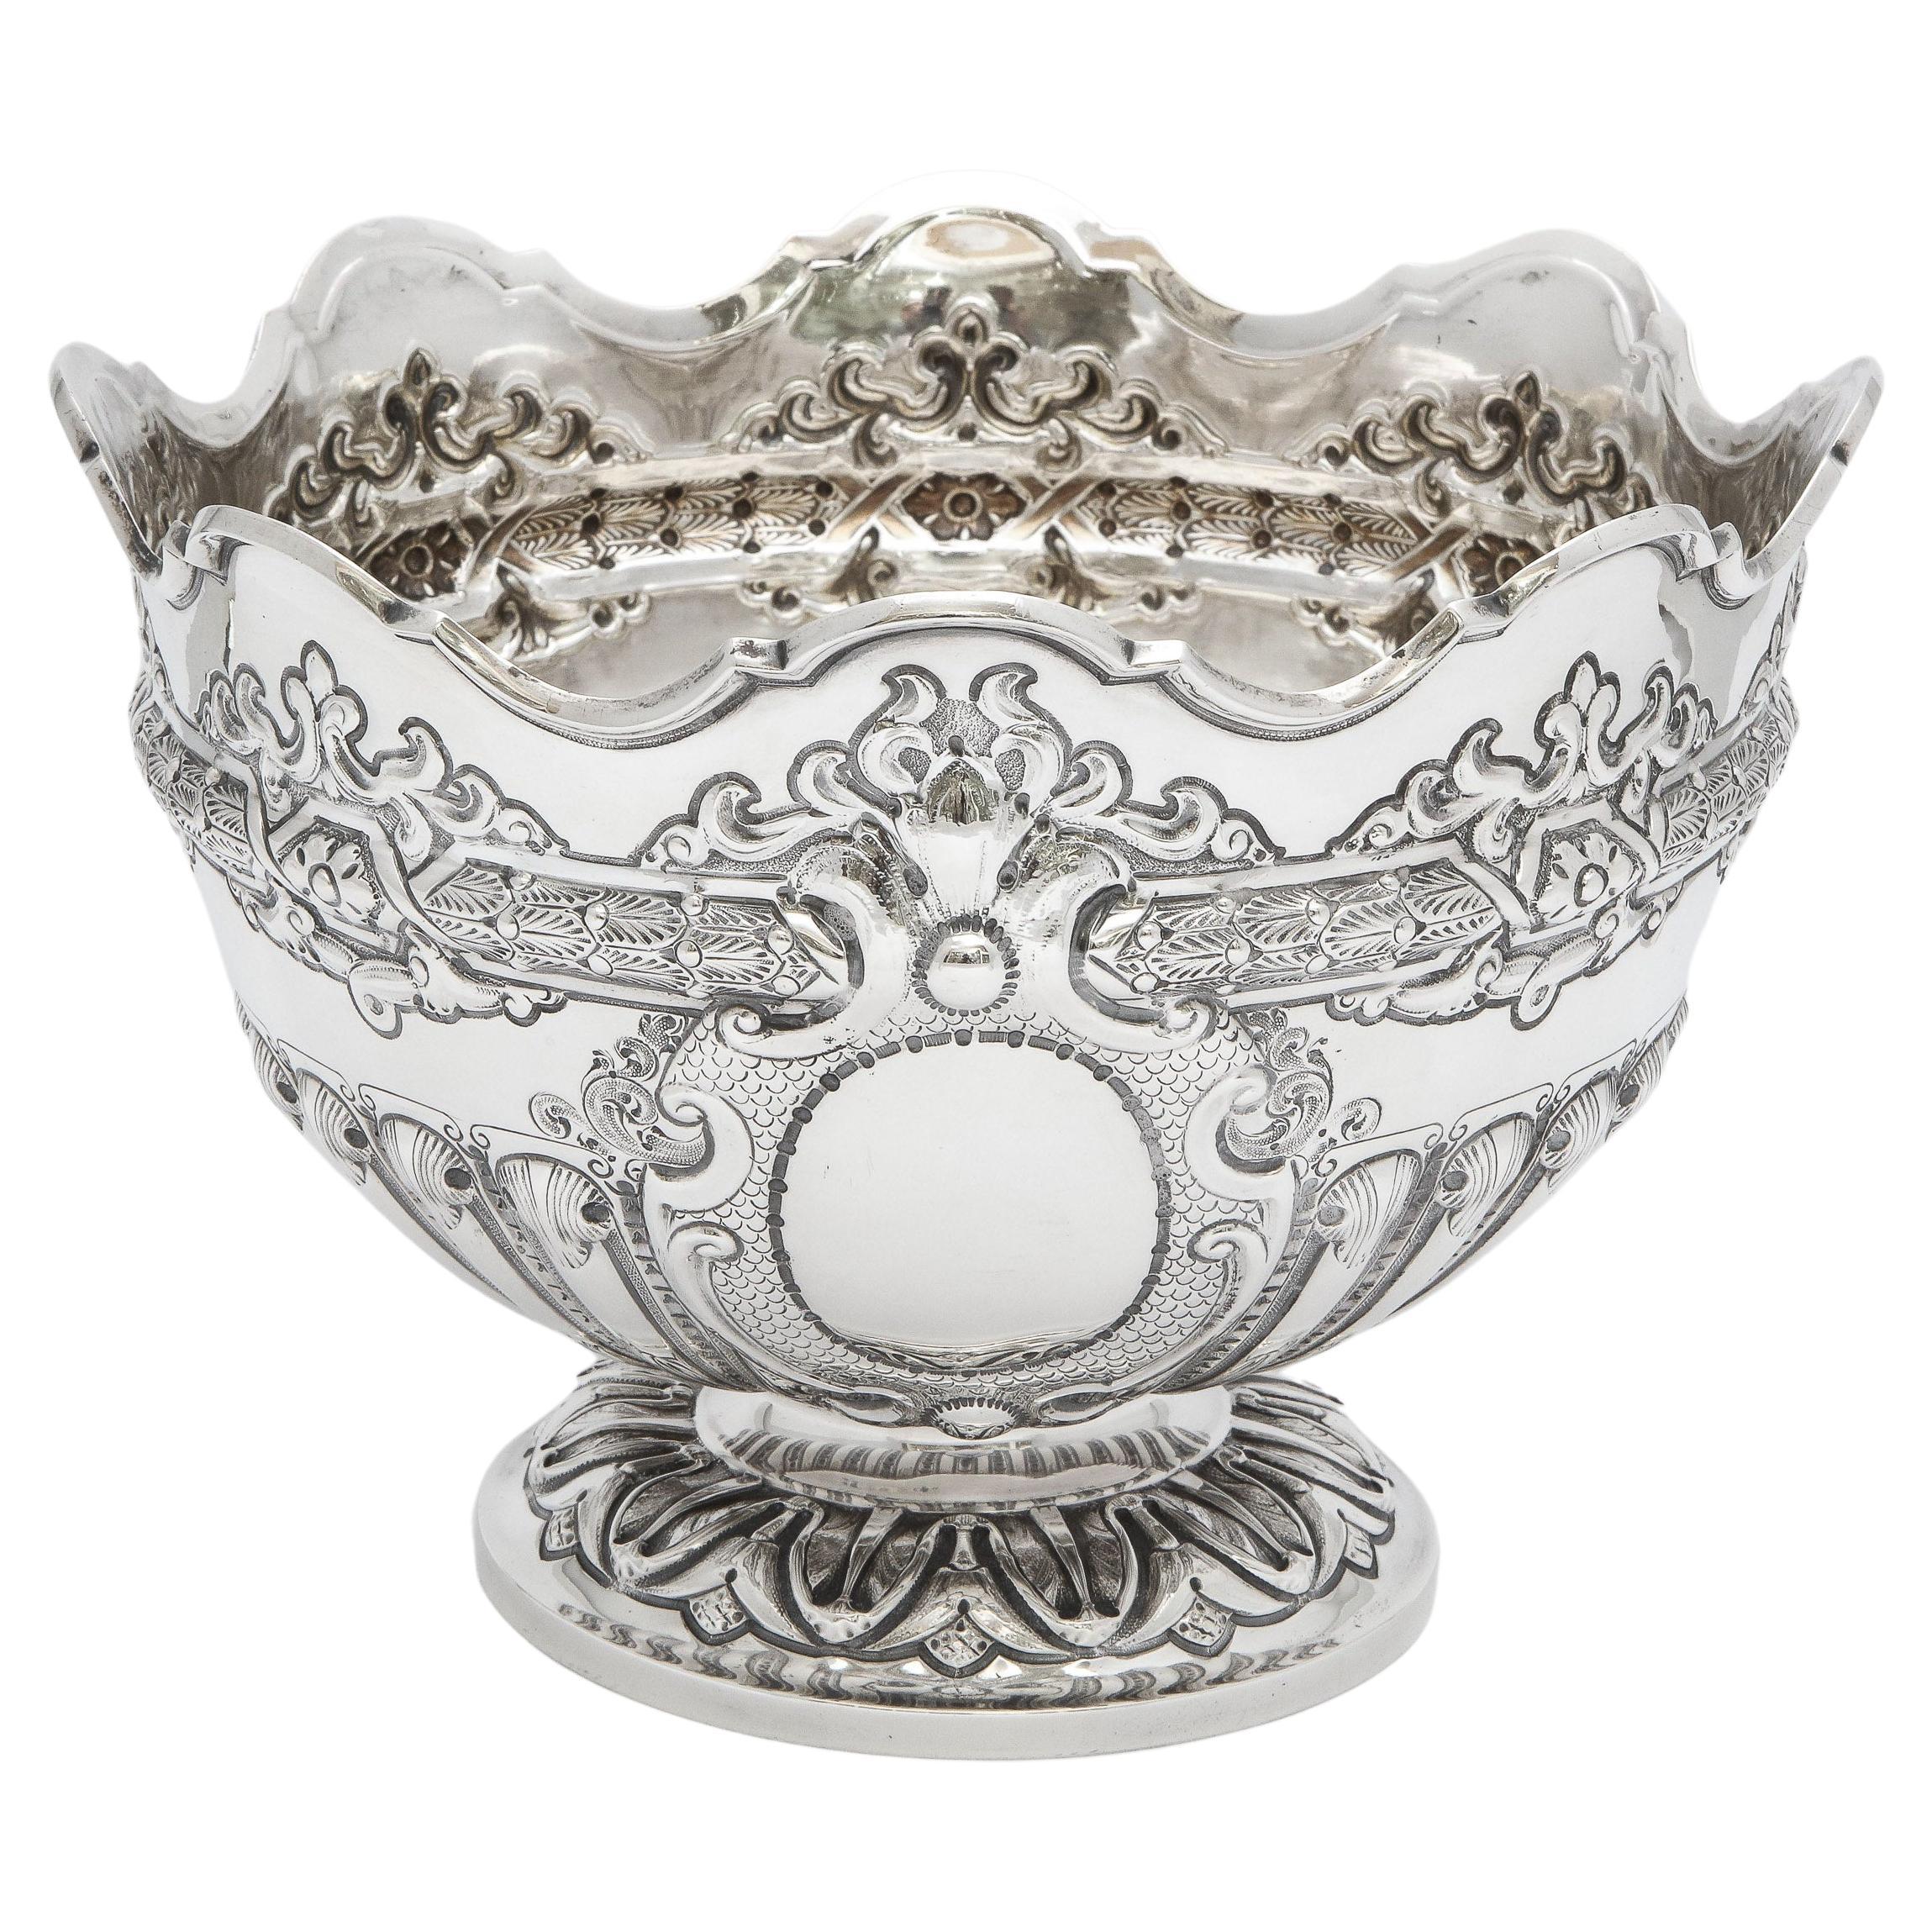 Victorian, Sterling Silver Pedestal-Based Monteith/Centerpiece Bowl